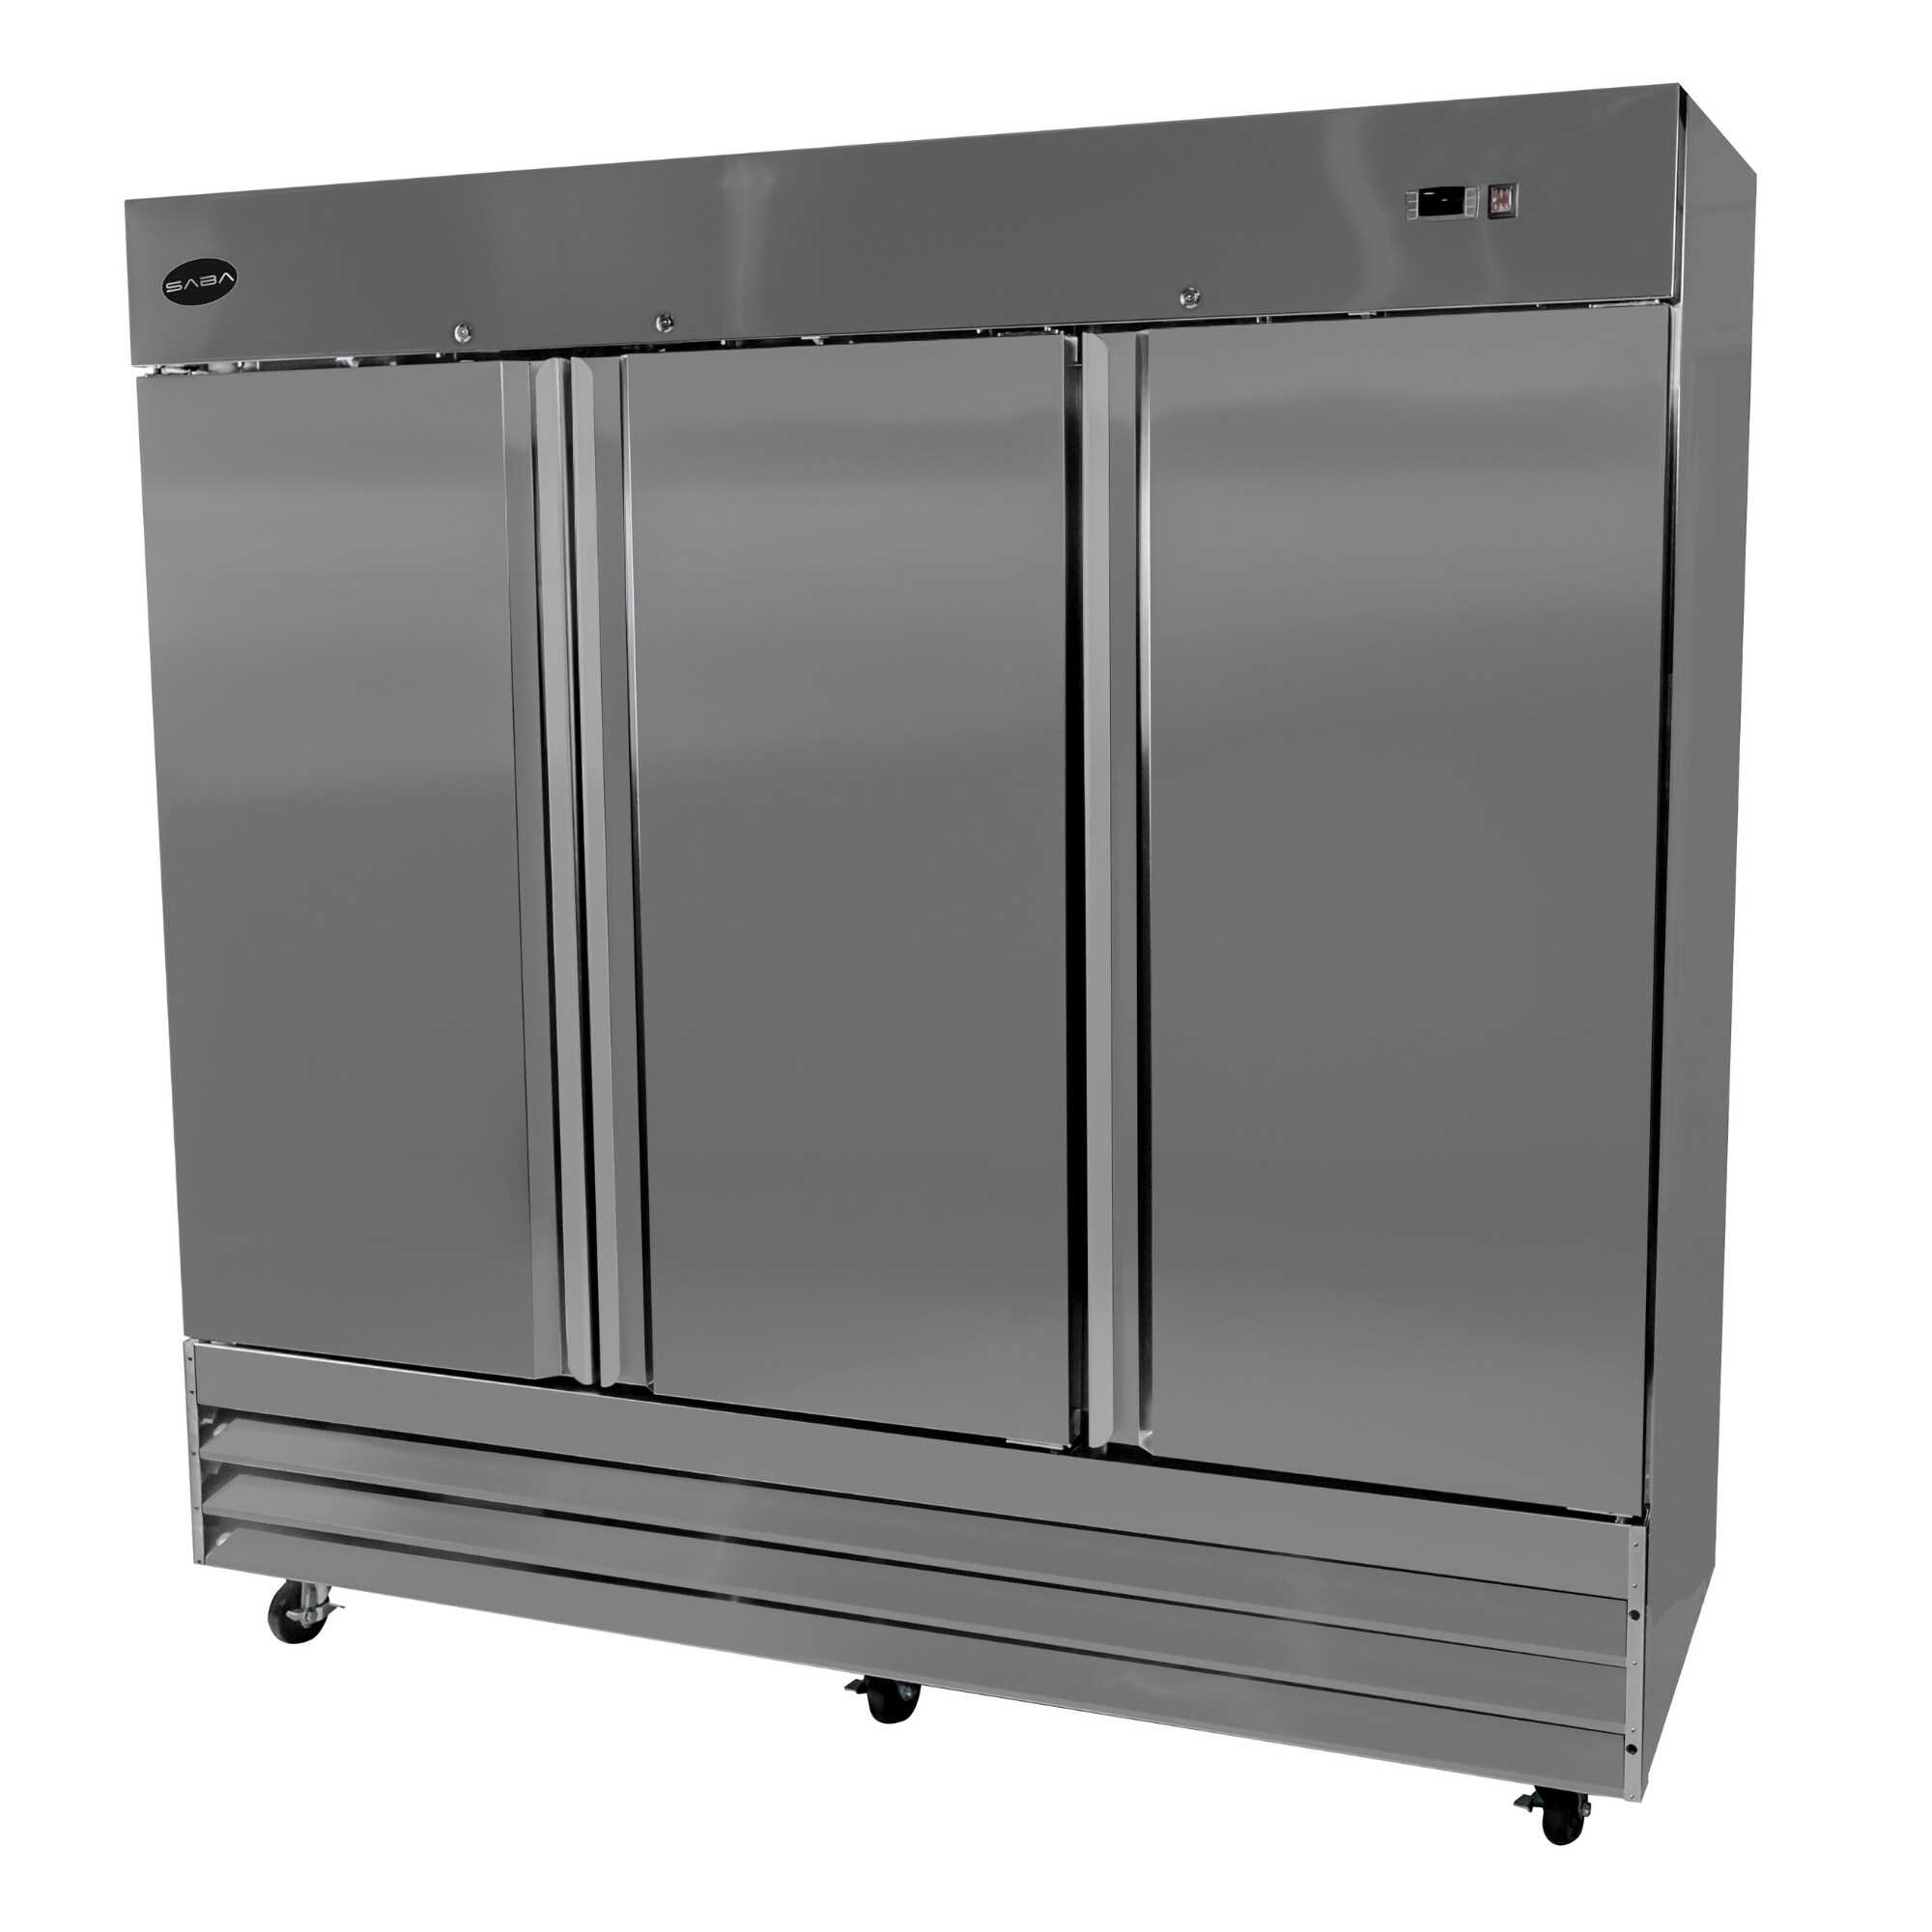 FT. Details about   SPARTAN STF 72 THREE DOOR SOLID S/S REACH IN FREEZER W/CASTERS 72 CU 